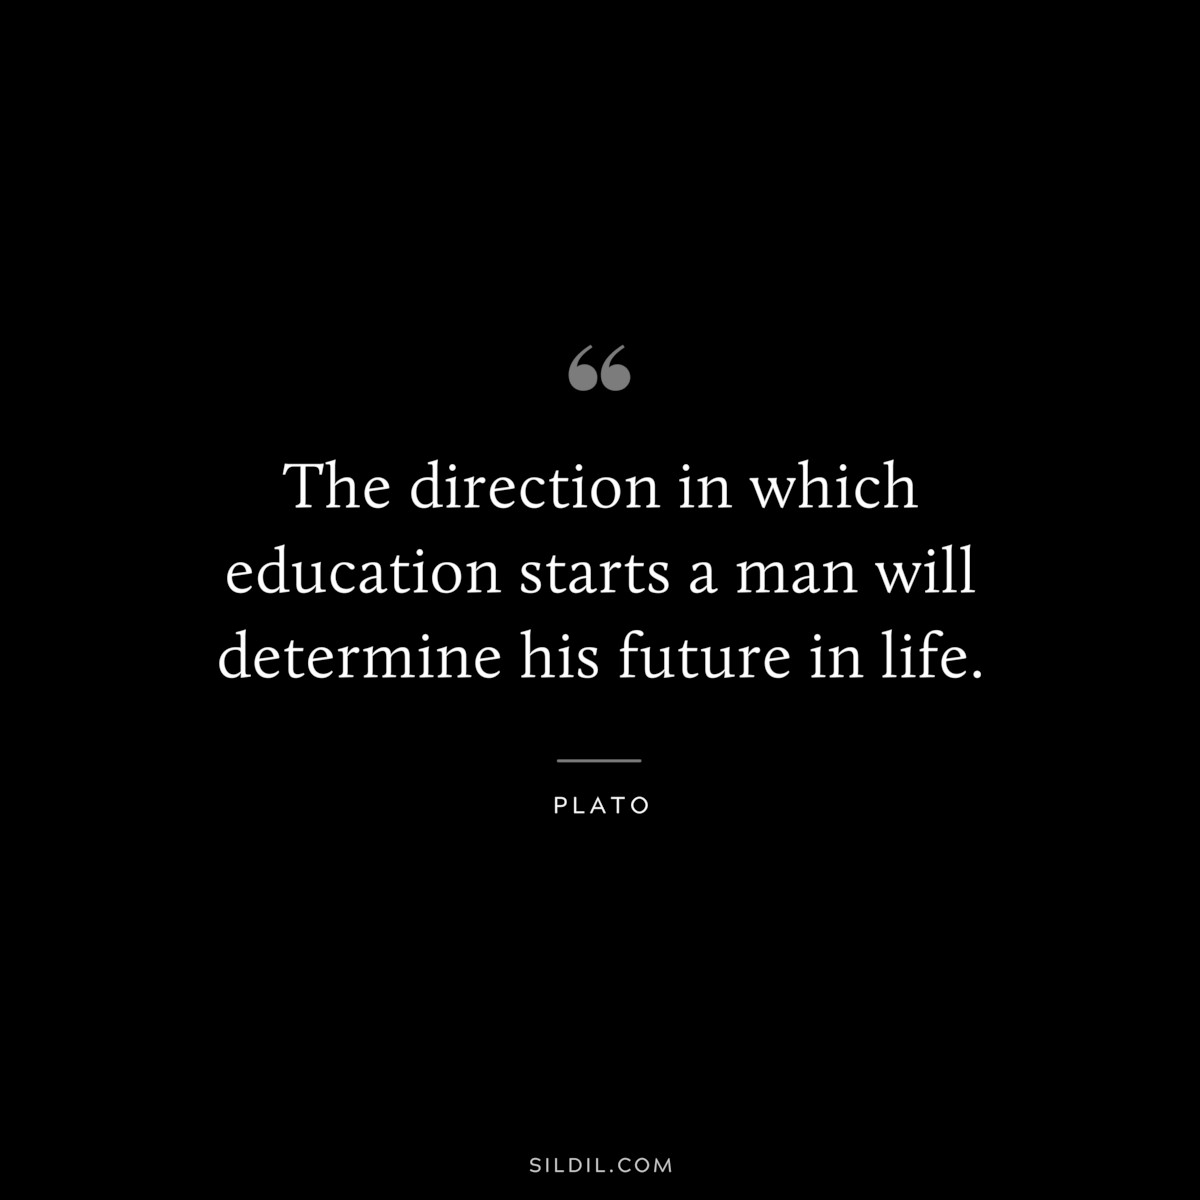 The direction in which education starts a man will determine his future in life. ― Plato